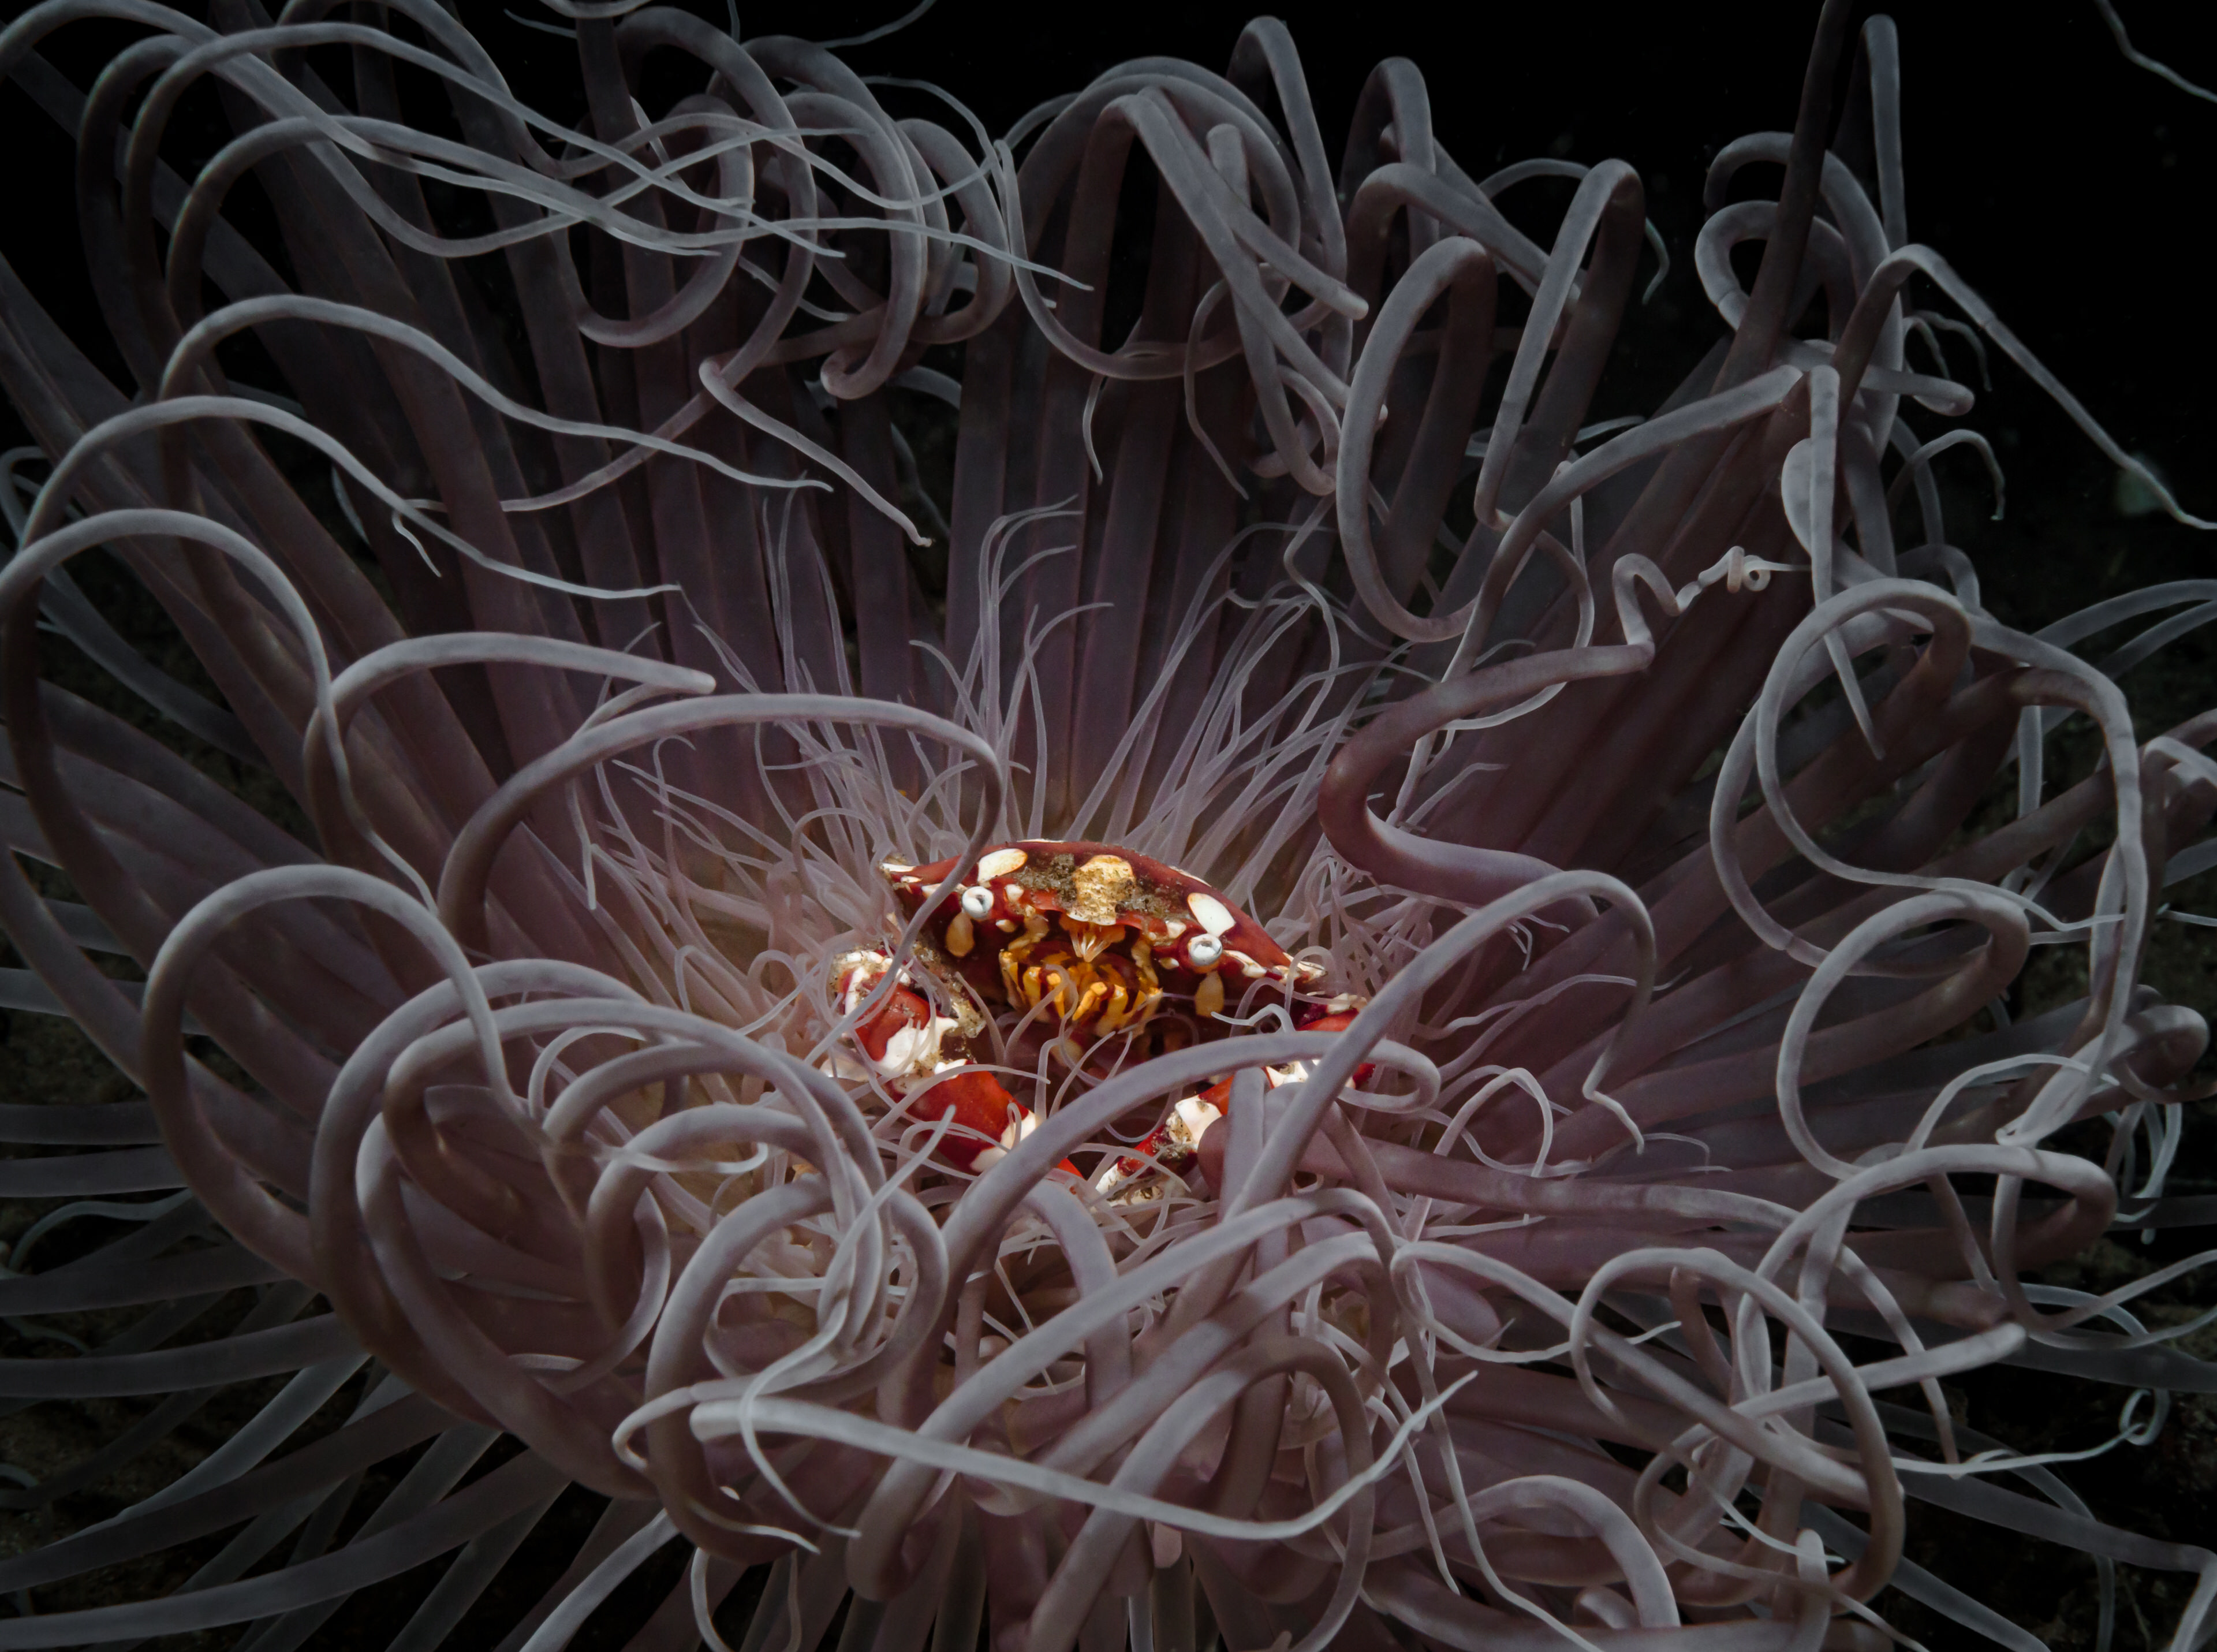 A red crab sits in the centre of a sea anemone as it sways in ocean current.